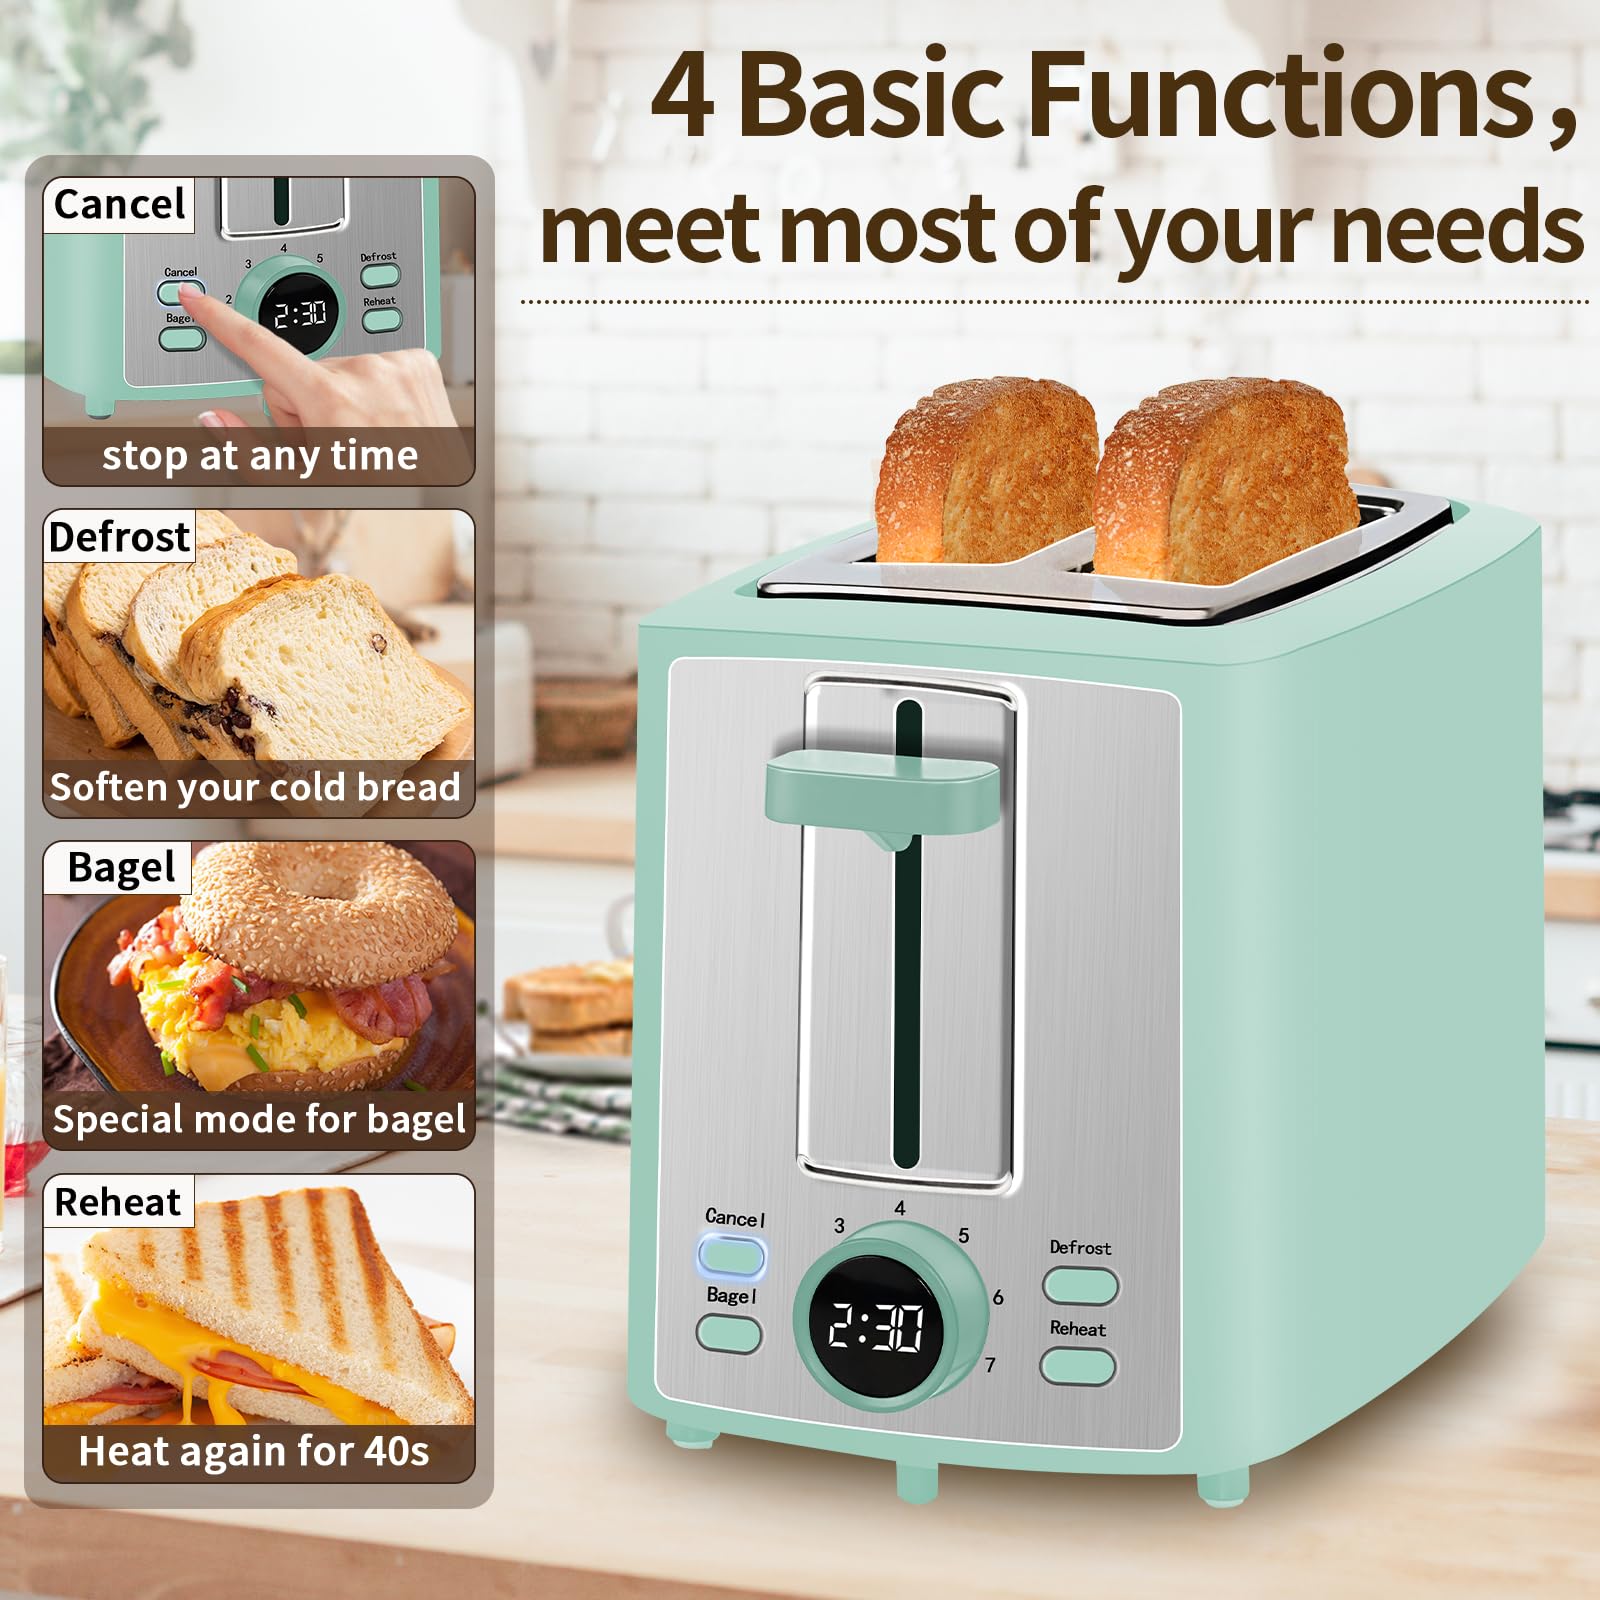 SEEDEEM Toaster 2 Slice, Bread Toaster with LCD Display, 7 Shade Settings, 1.４'' Variable Extra Wide Slots Toaster with Cancel, Bagel, Defrost, Reheat Functions, Removable Crumb Tray, 900W, Azure Blue